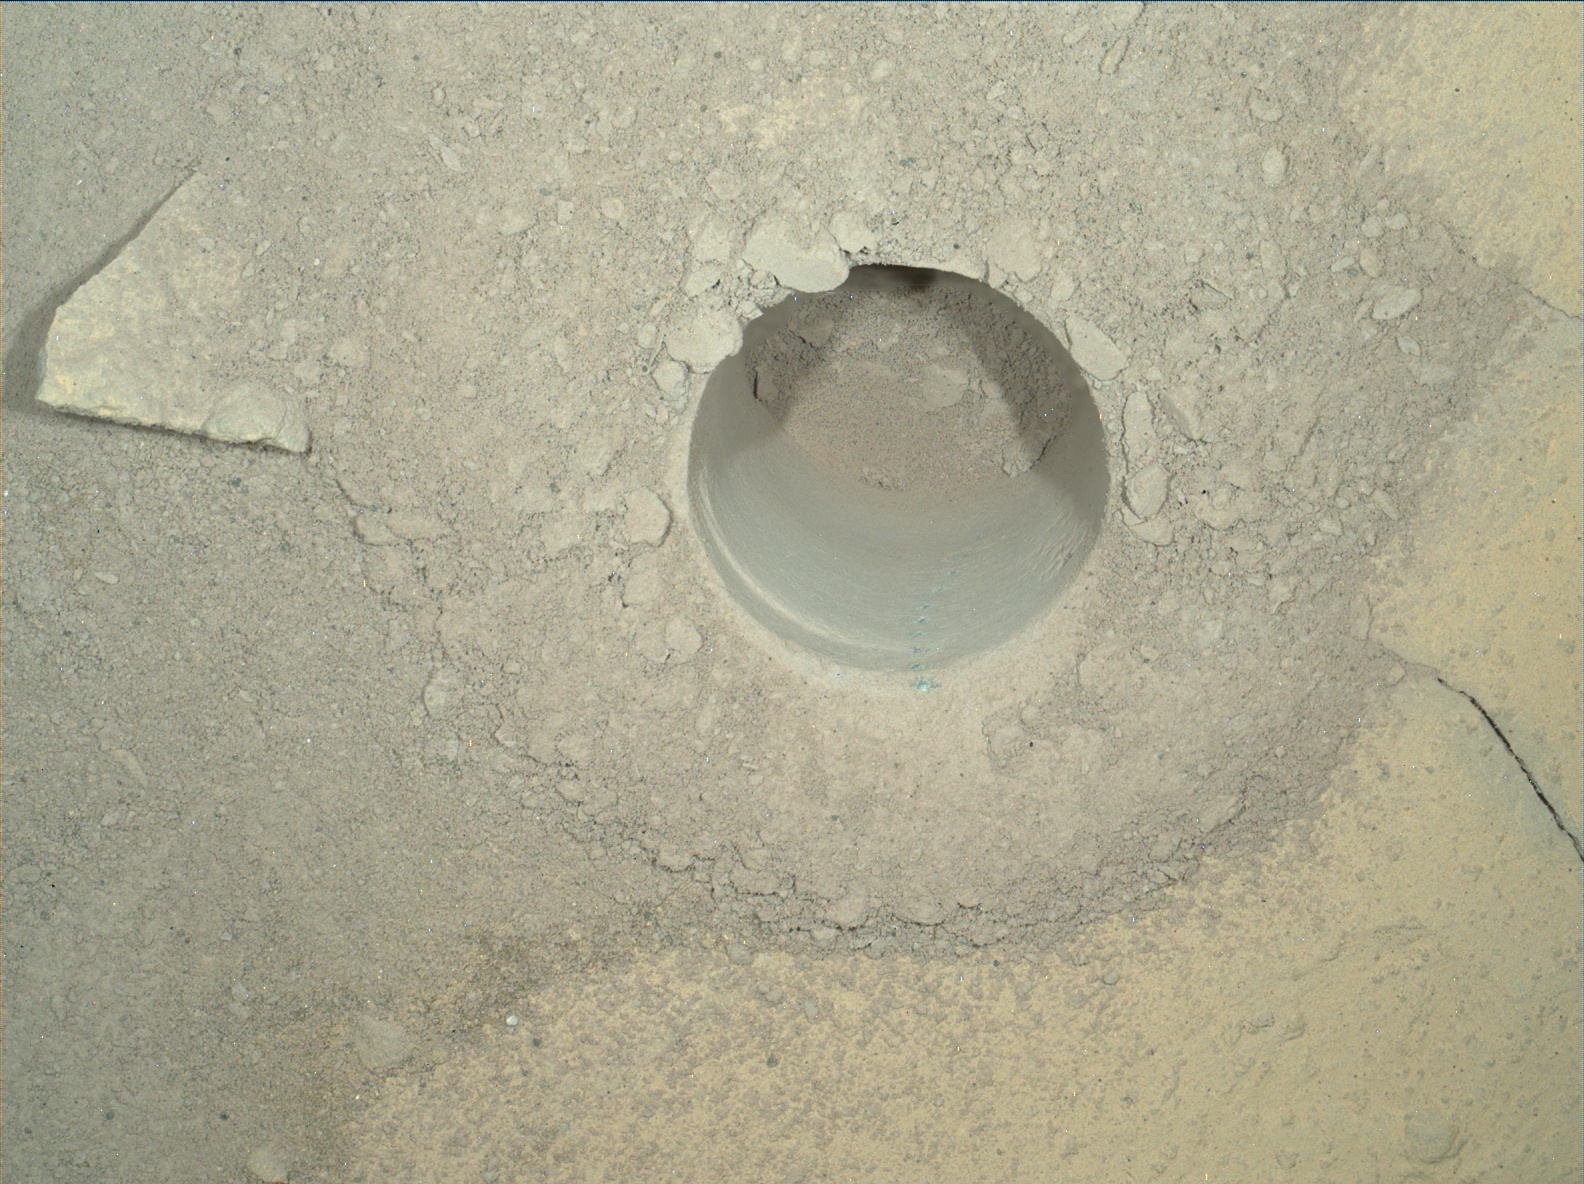 Nasa's Mars rover Curiosity acquired this image using its Mars Hand Lens Imager (MAHLI) on Sol 771